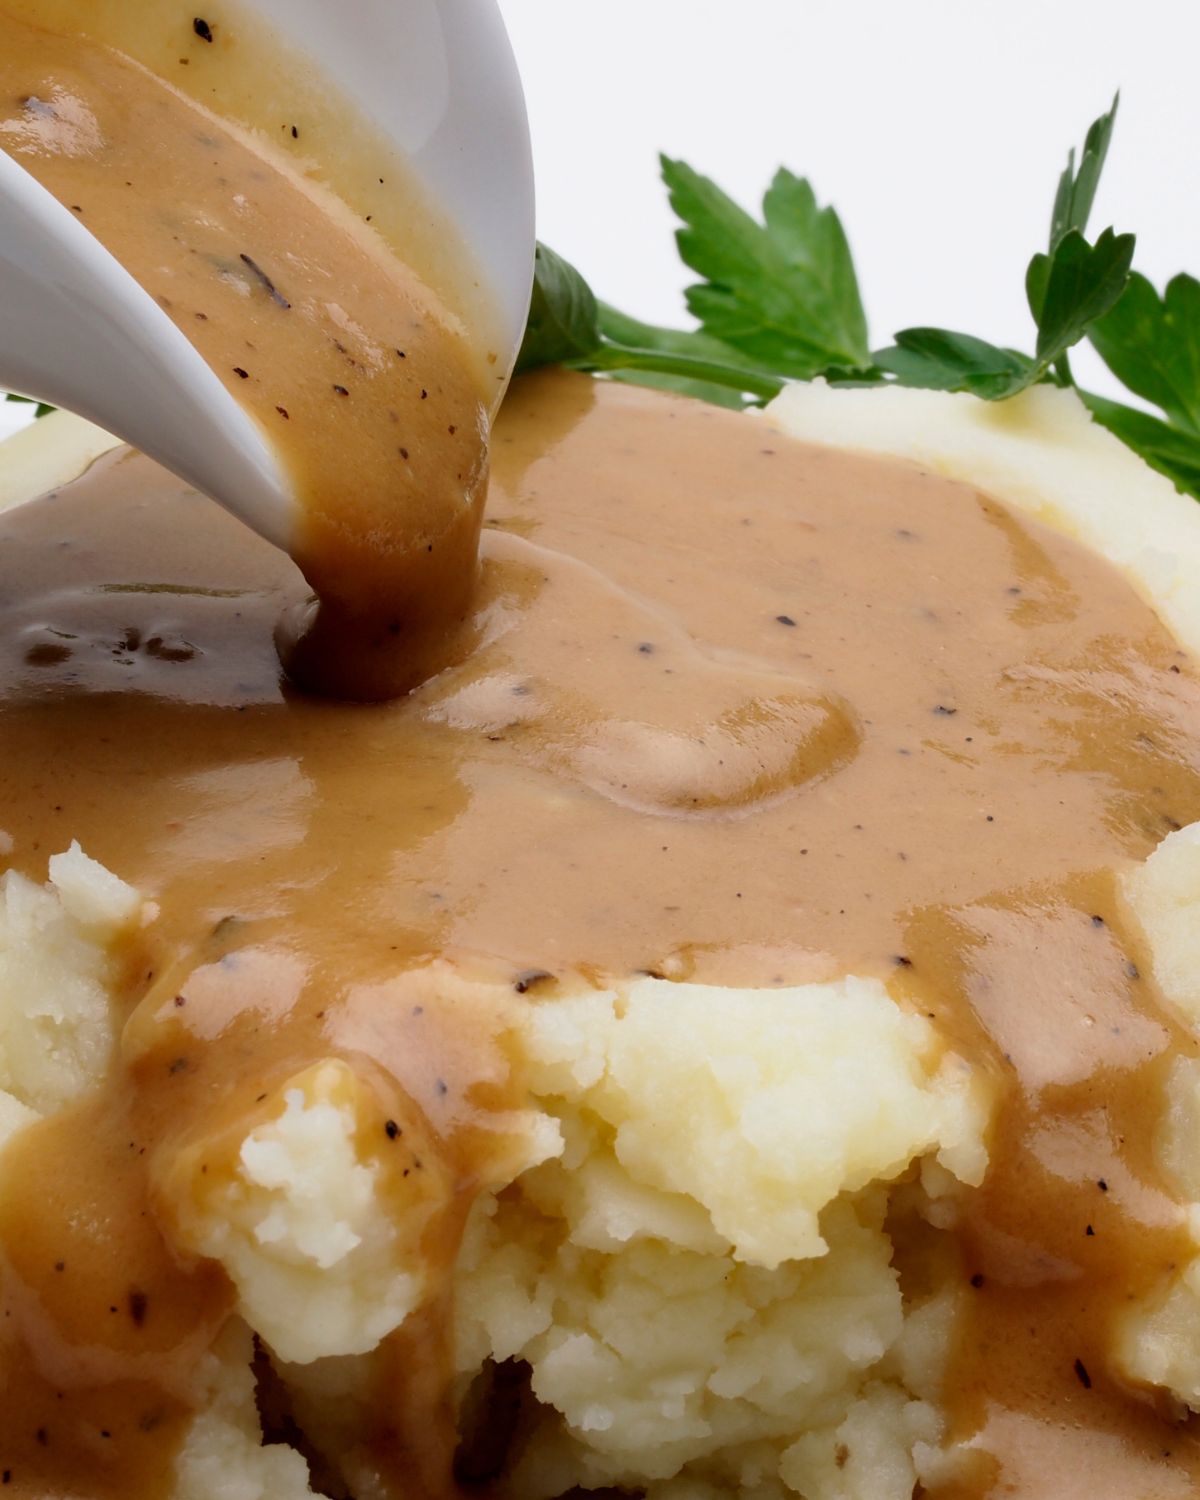 Gravy from drippings over mashed potatoes.